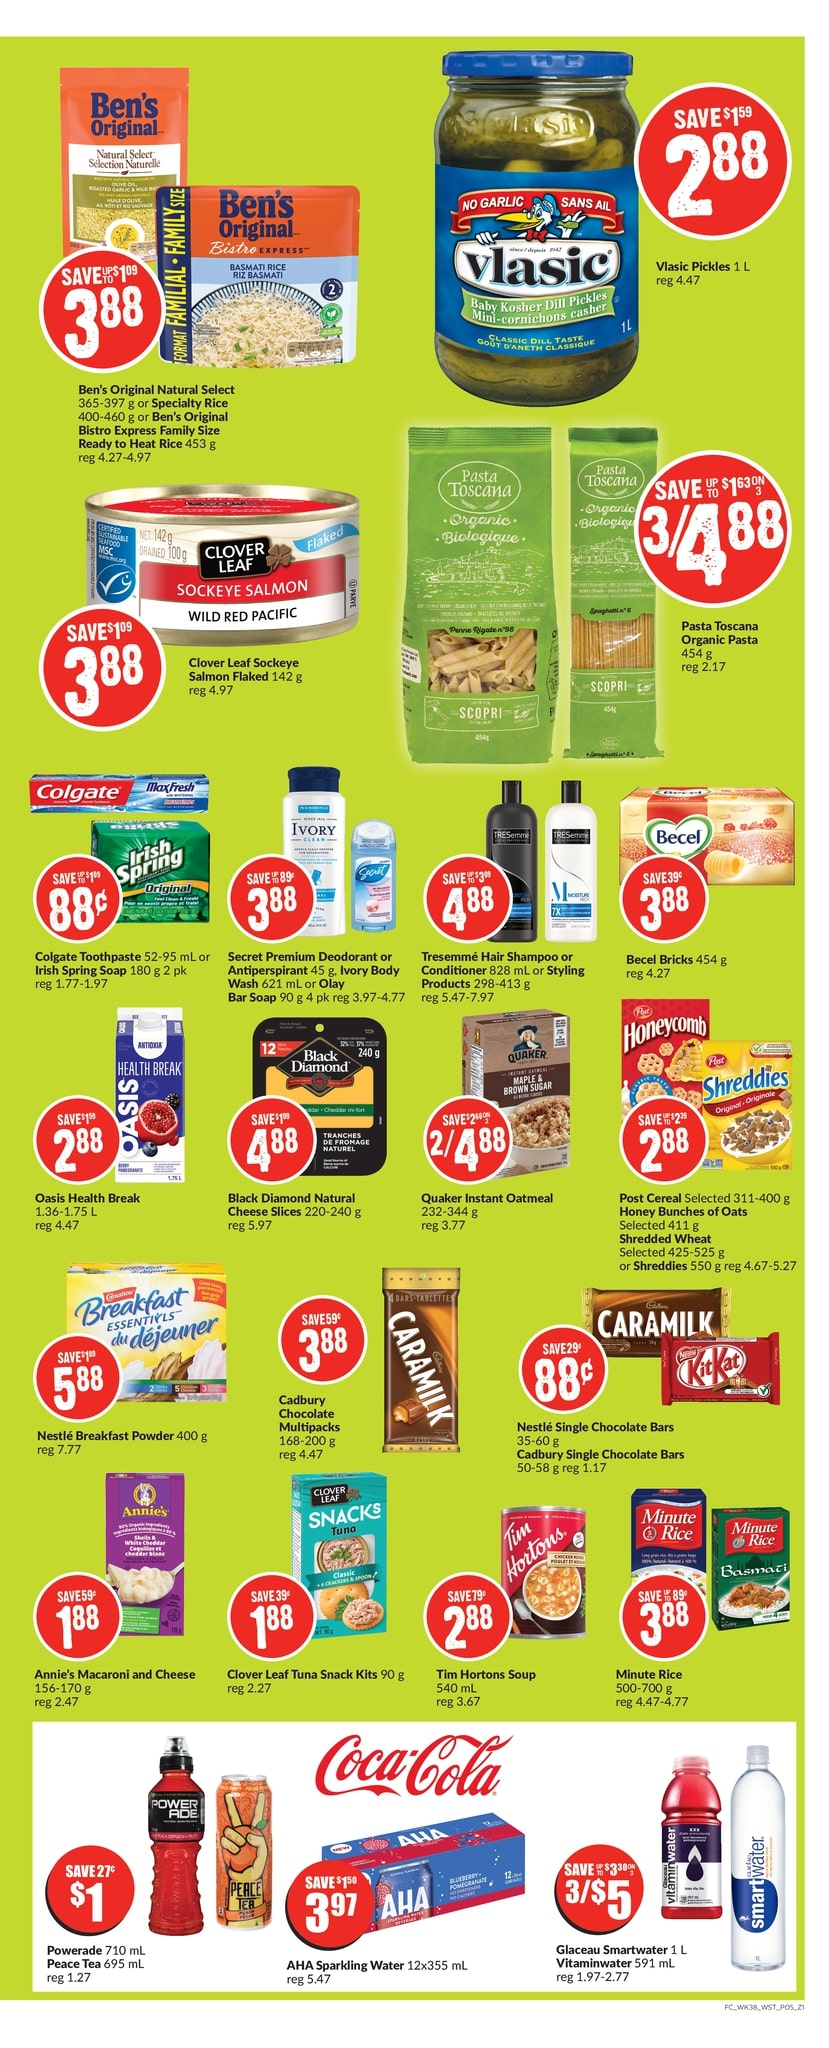 FreshCo British Columbia - Weekly Flyer Specials - Page 6